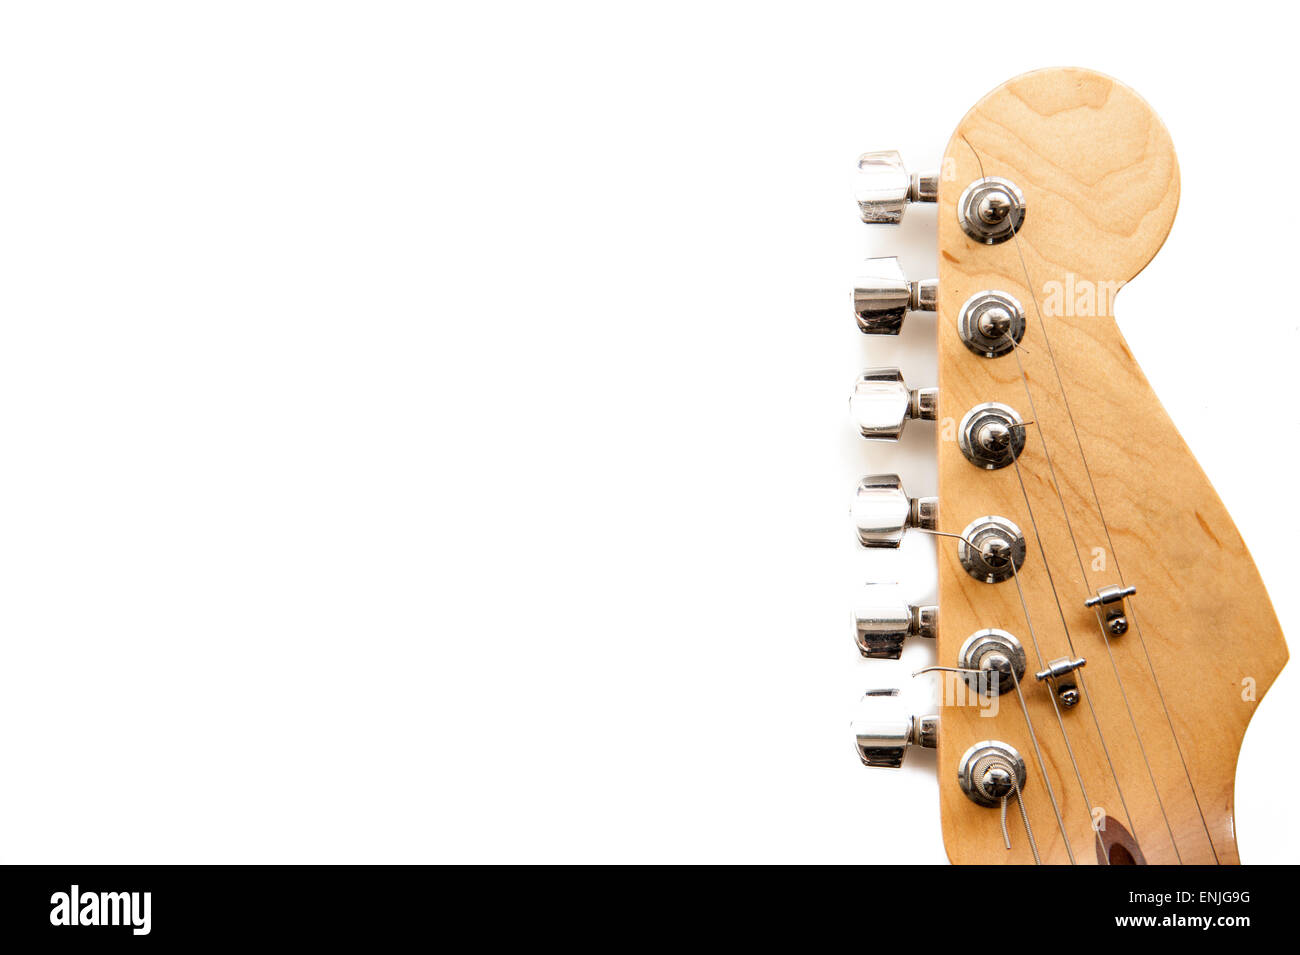 Electric guitar wooden color headstock and tuning peg detail isolated on white Stock Photo